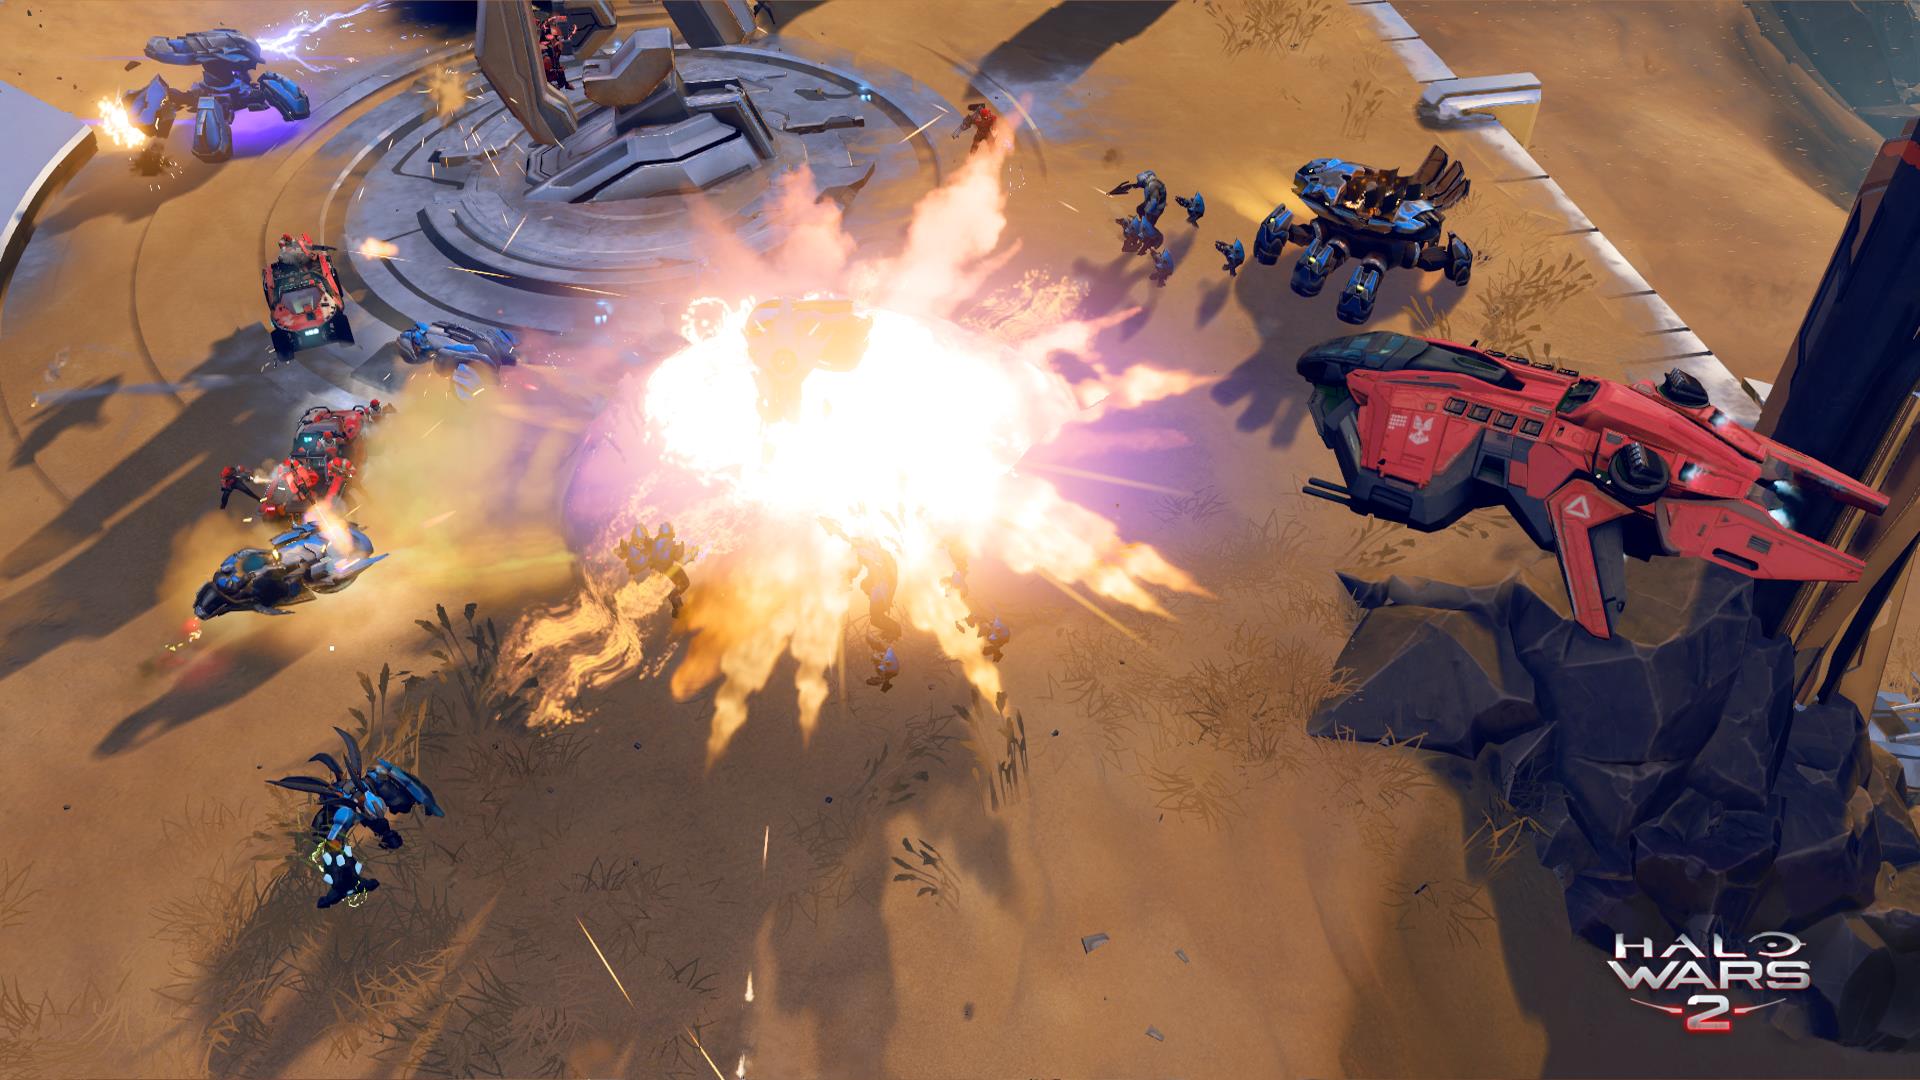 Image for Halo Wars 2 beta out now on PC, Xbox One - watch the tutorial video